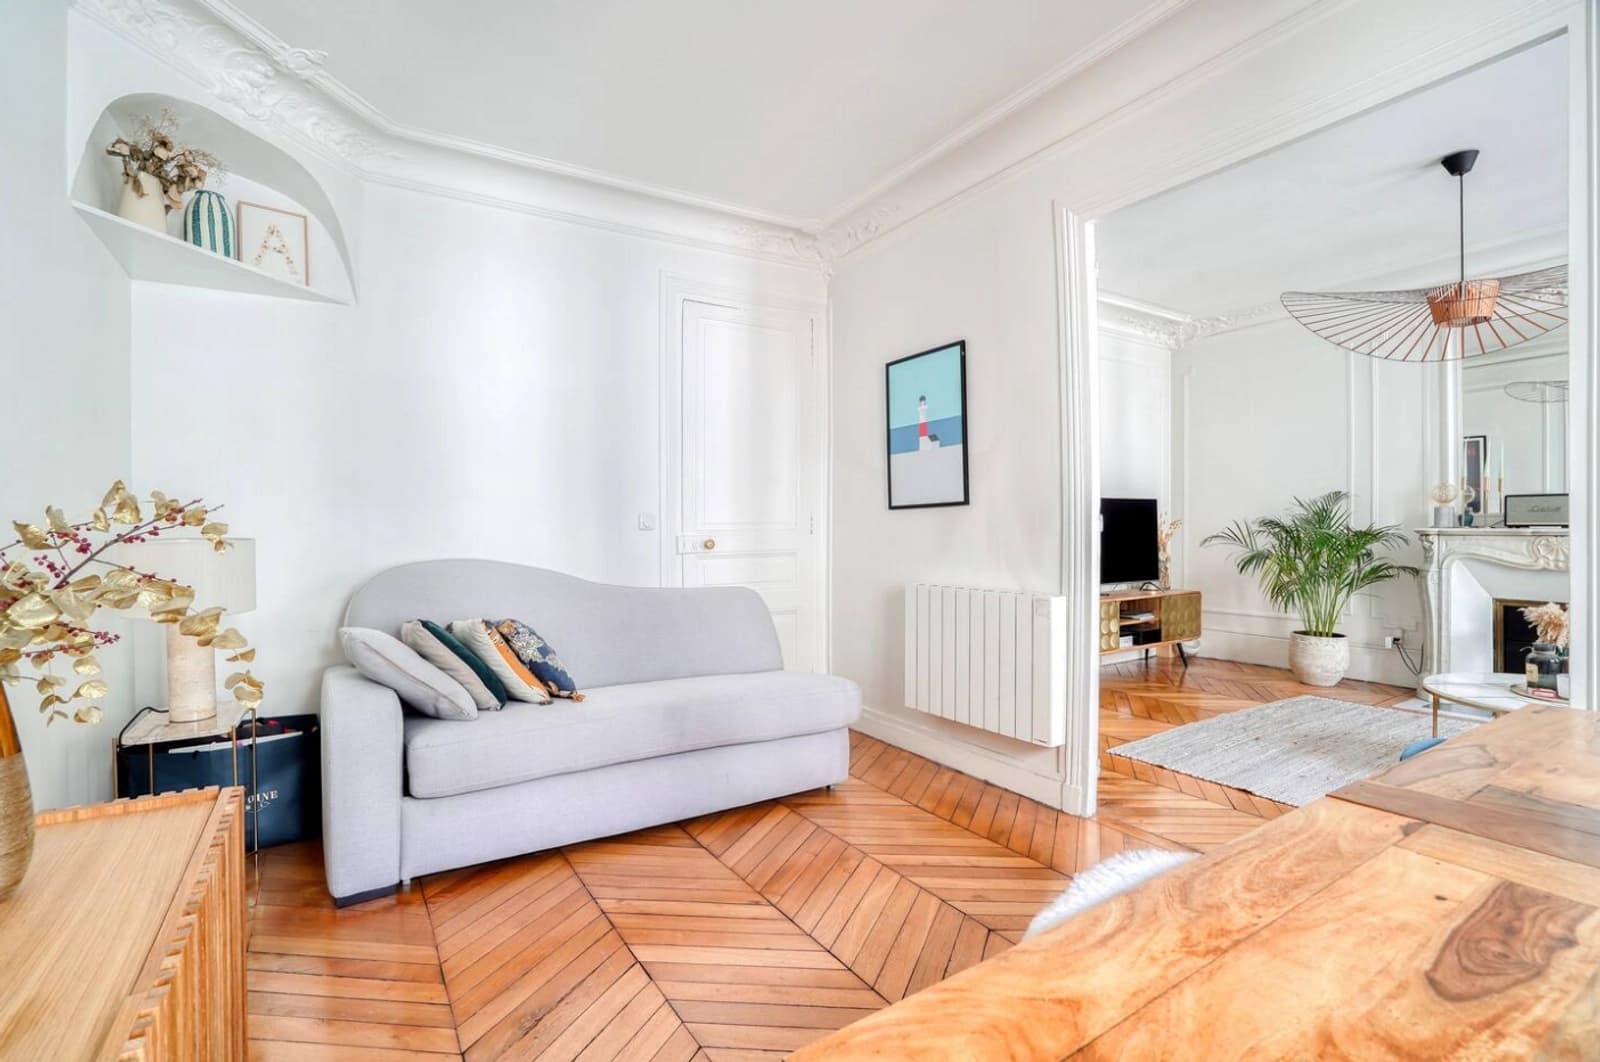 Space Haussmann apartment in the heart of Pigalle - 1